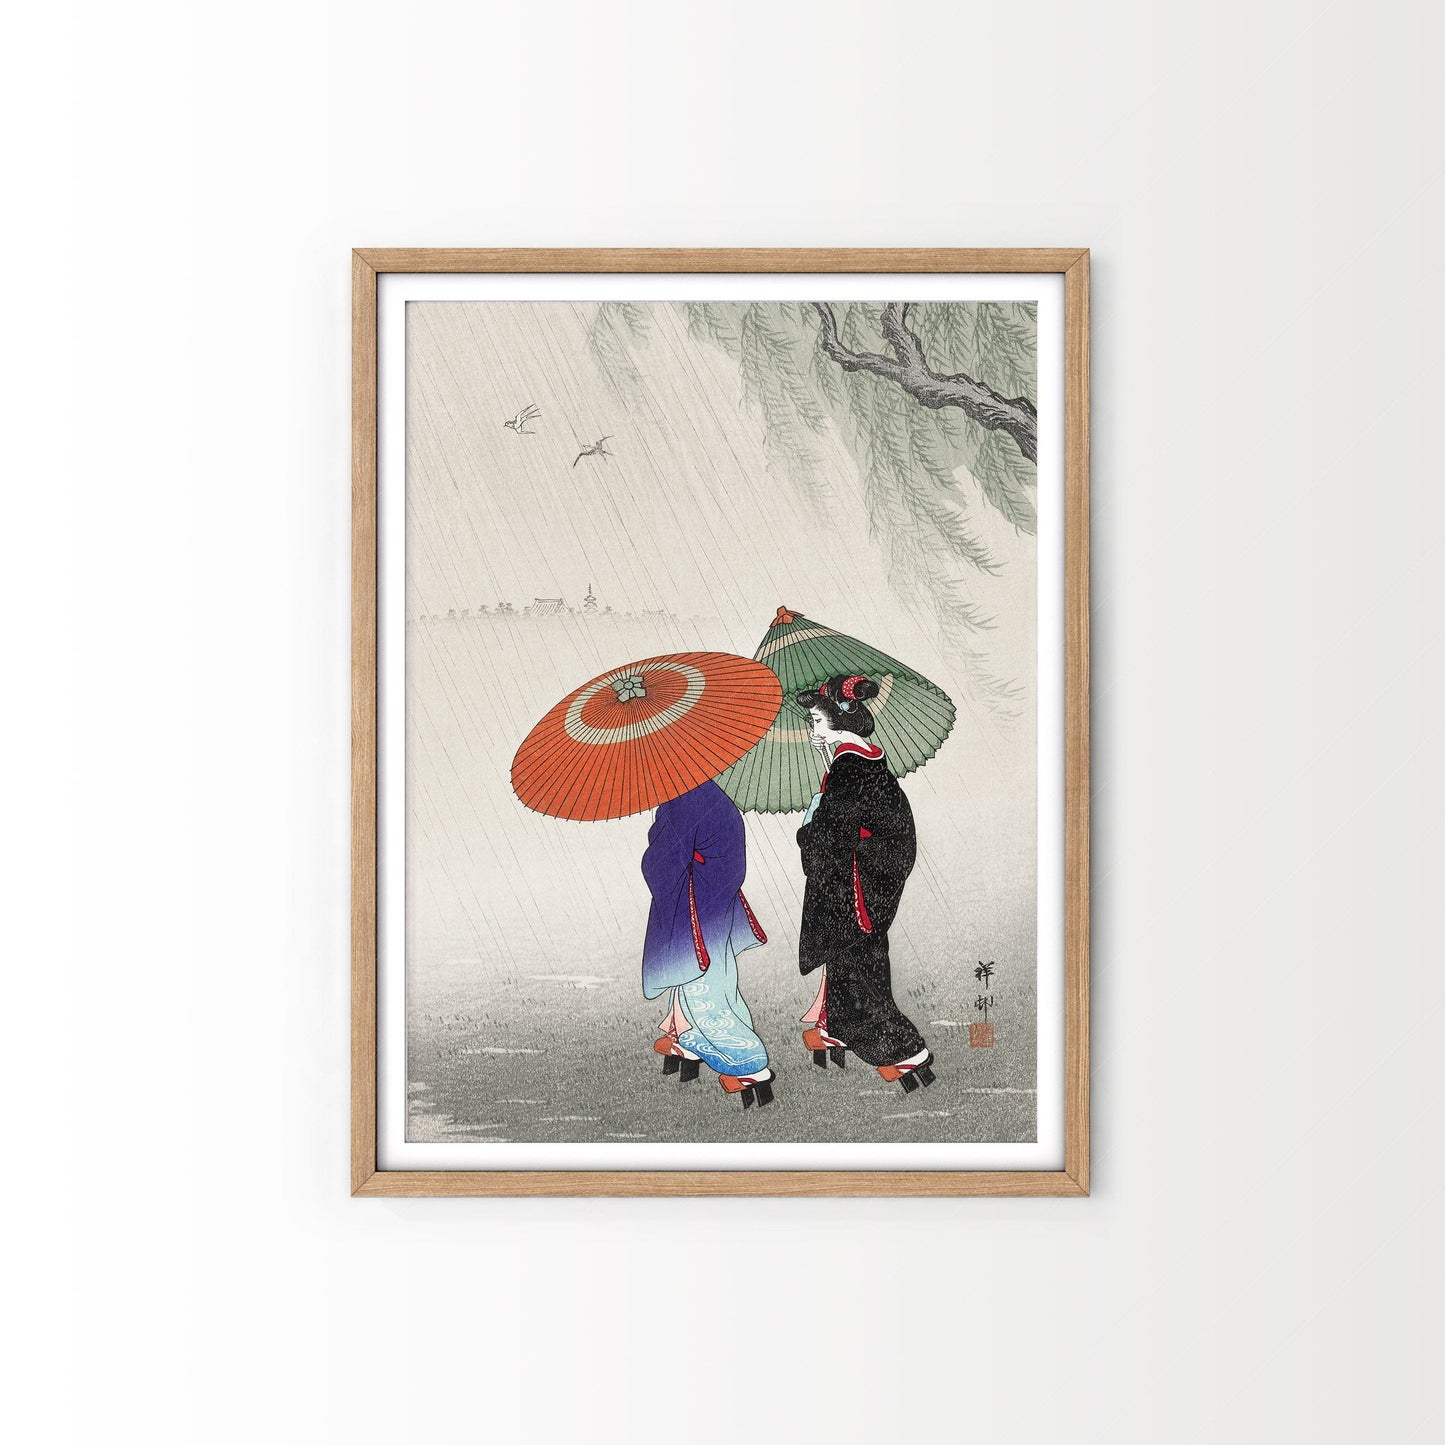 Home Poster Decor Ohara Koson Poster, Japanese Wall Art, Vintage Poster, Retro Art, Two Woman in the rain, HIGH Quality Archival Paper, Large Sizes